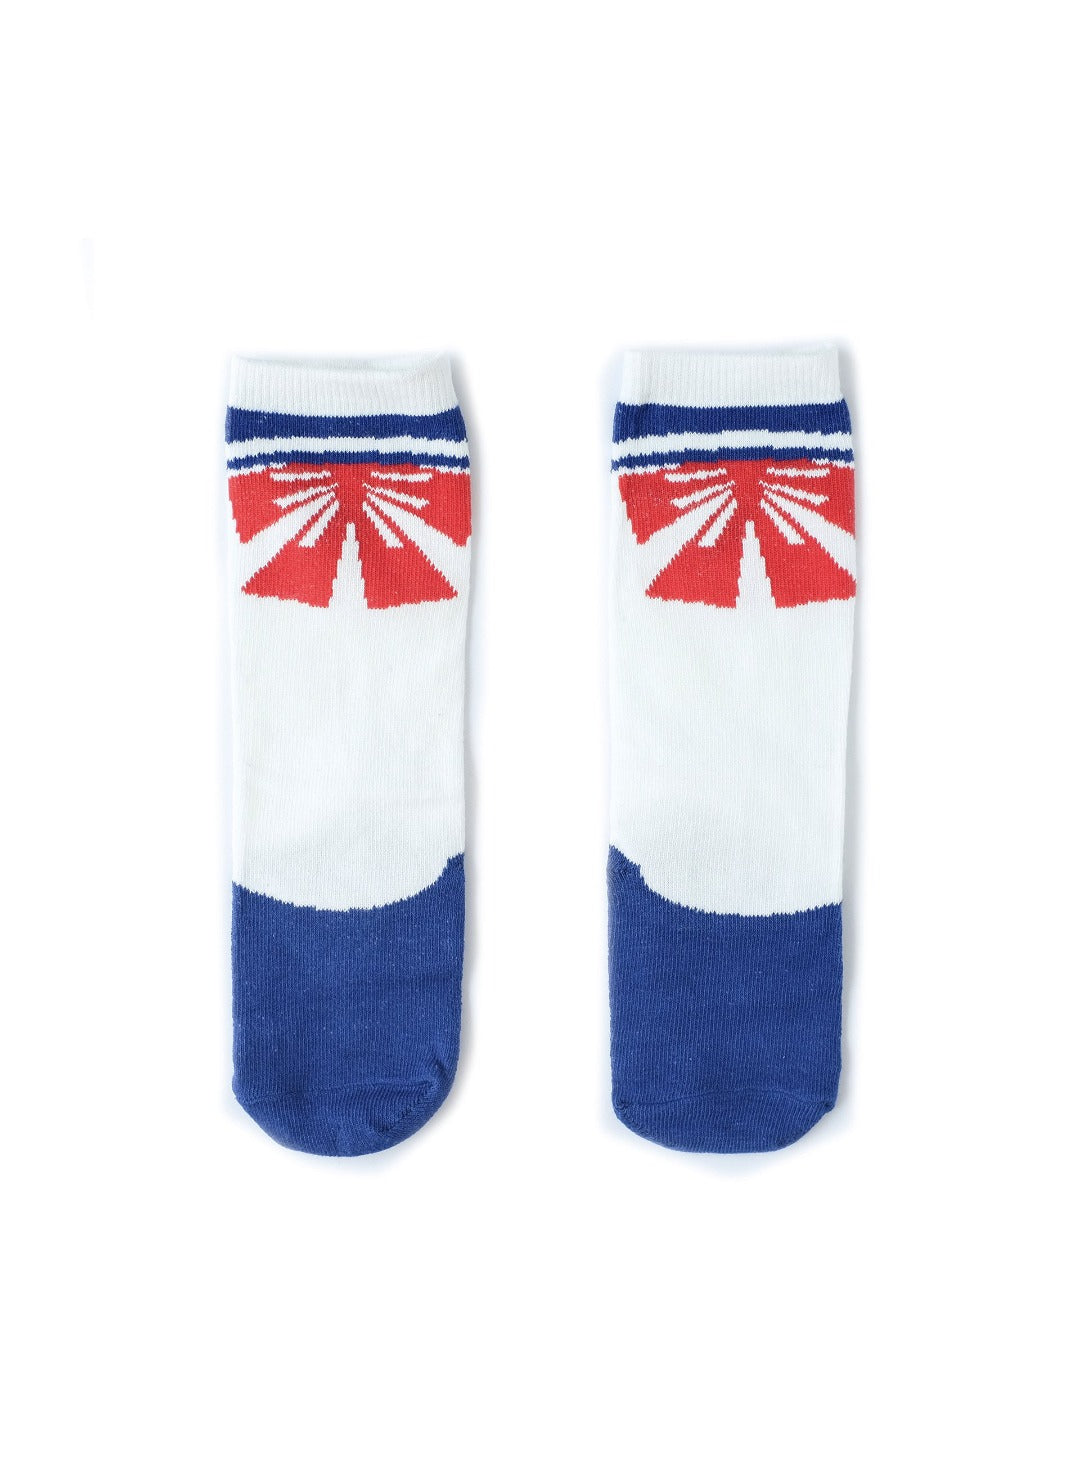 japanese school style pearl white socks with red ribbon